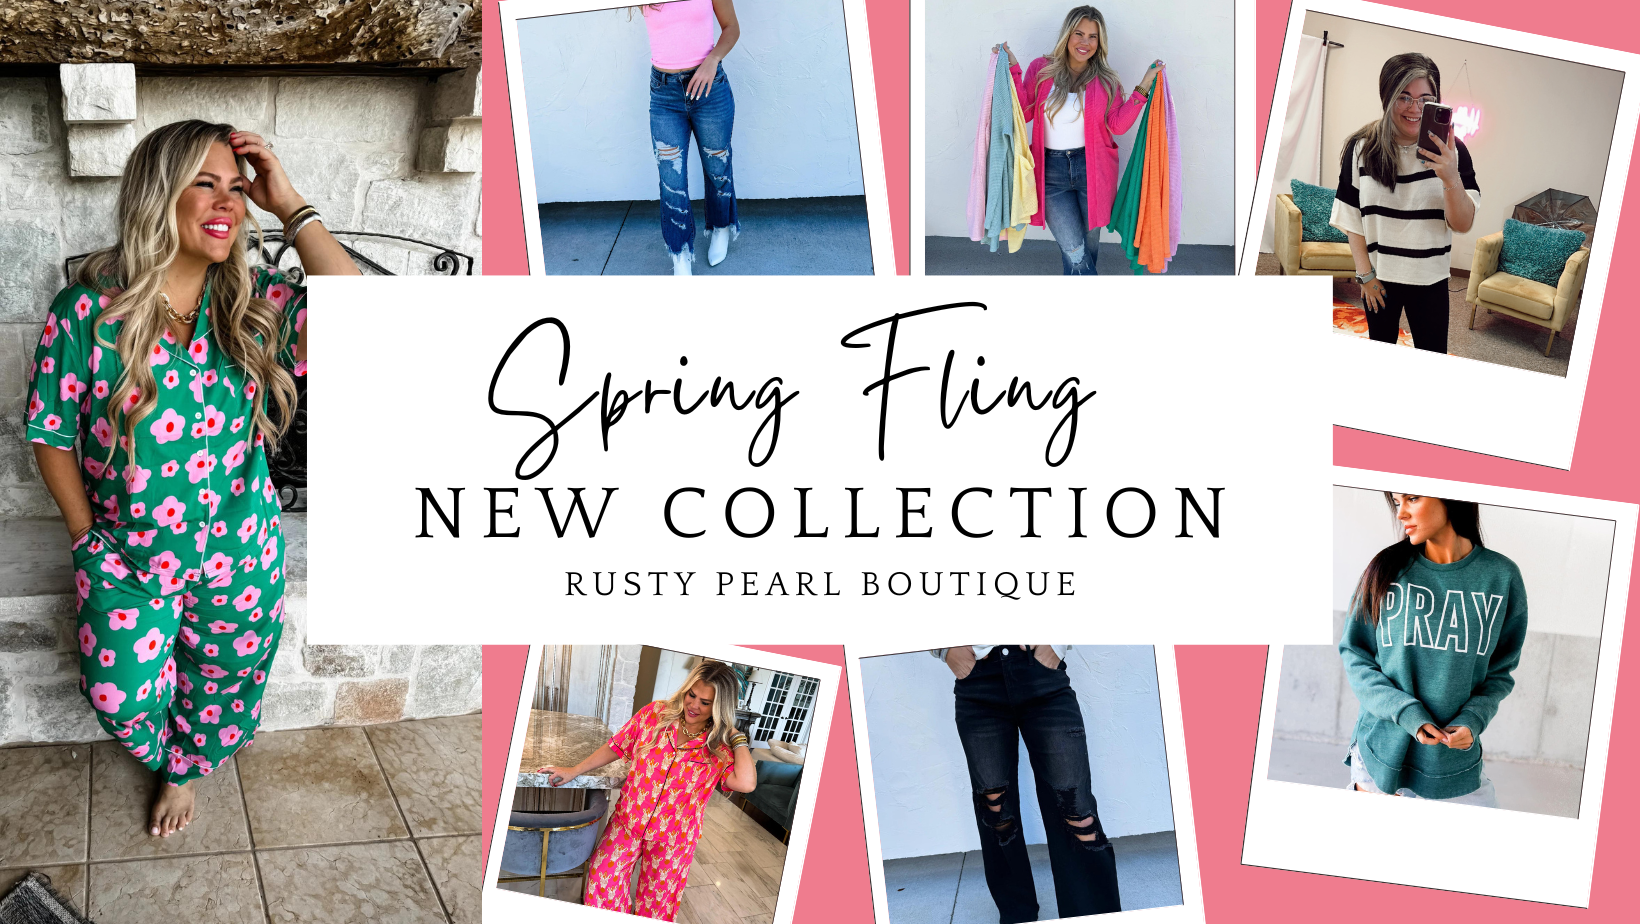 Spring Fling Collection